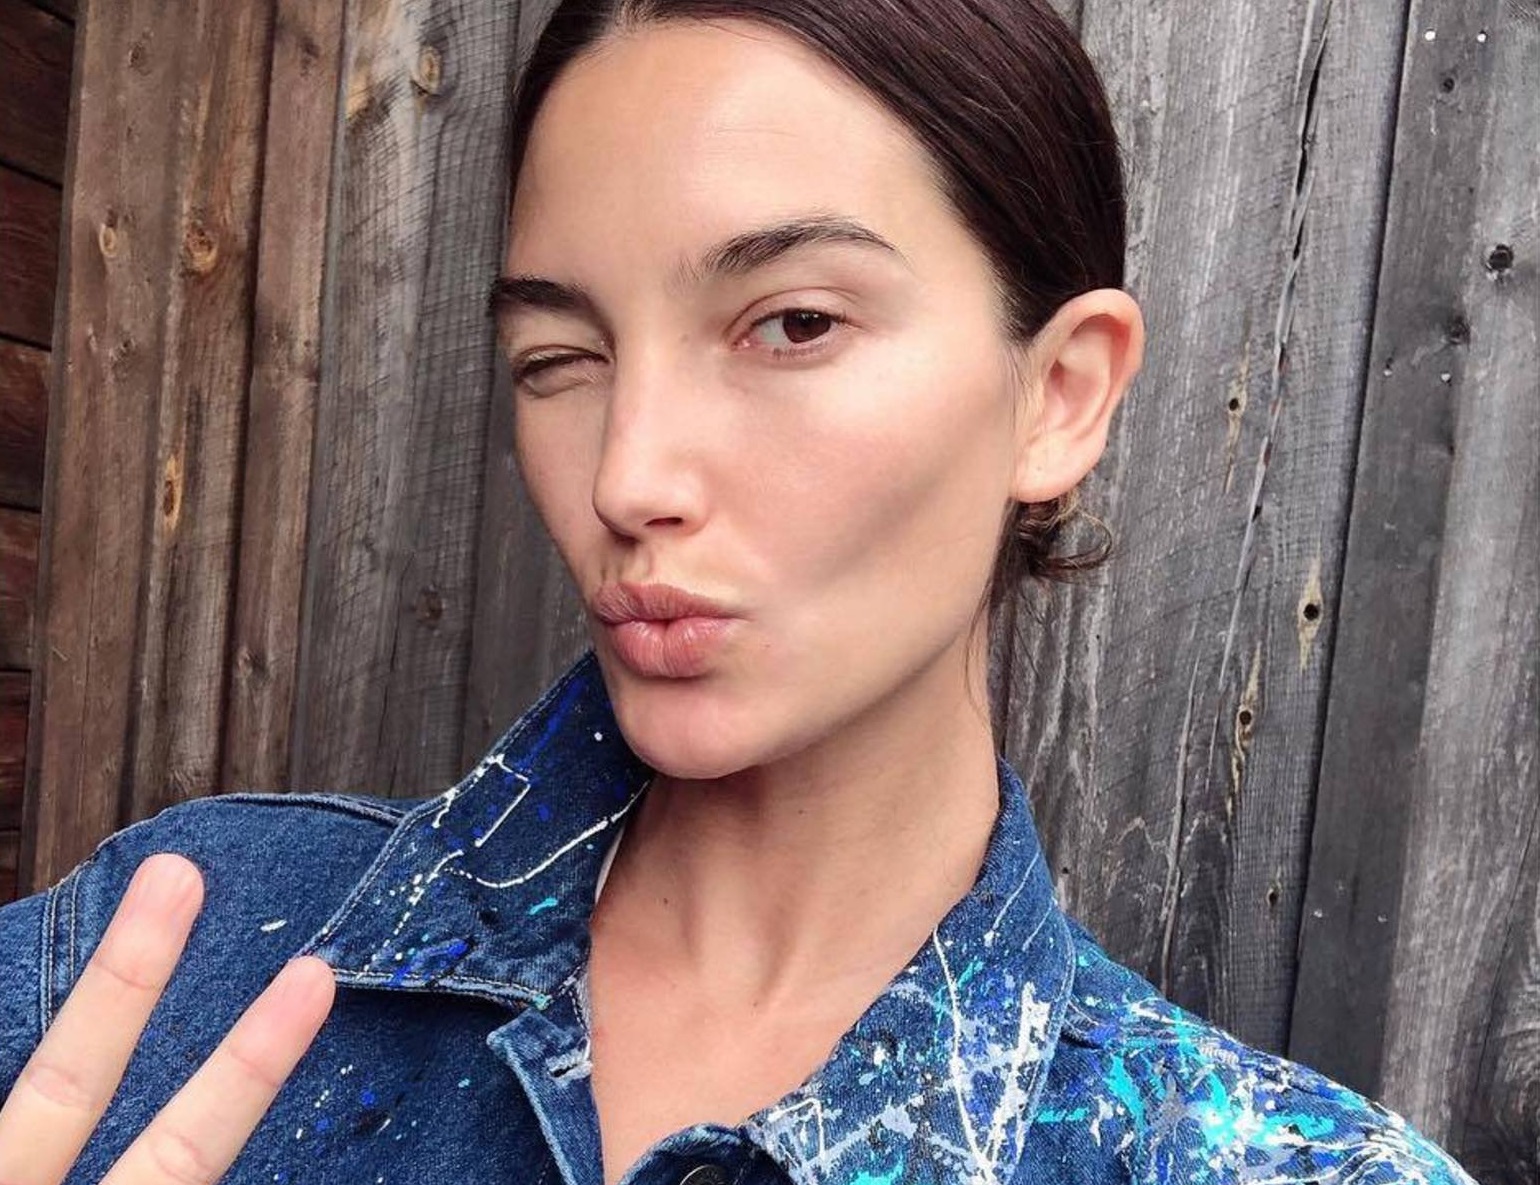 Lily Aldridge (lilyaldridge / 13.10.2018): Proud to be wearing my amazing jacket designed by @thesashaprojectla Sasha is an absolute SuperSTAR who paints jeans as therapy for her cerebral palsy She is combining forces today with @cmnhospitals to raise money for childrens hospitals Go check out her designs! #miracles #rocktherunway ", Image: 391154223, License: Rights-managed, Restrictions: , Model Release: no, Credit line: Profimedia, Face To Face A